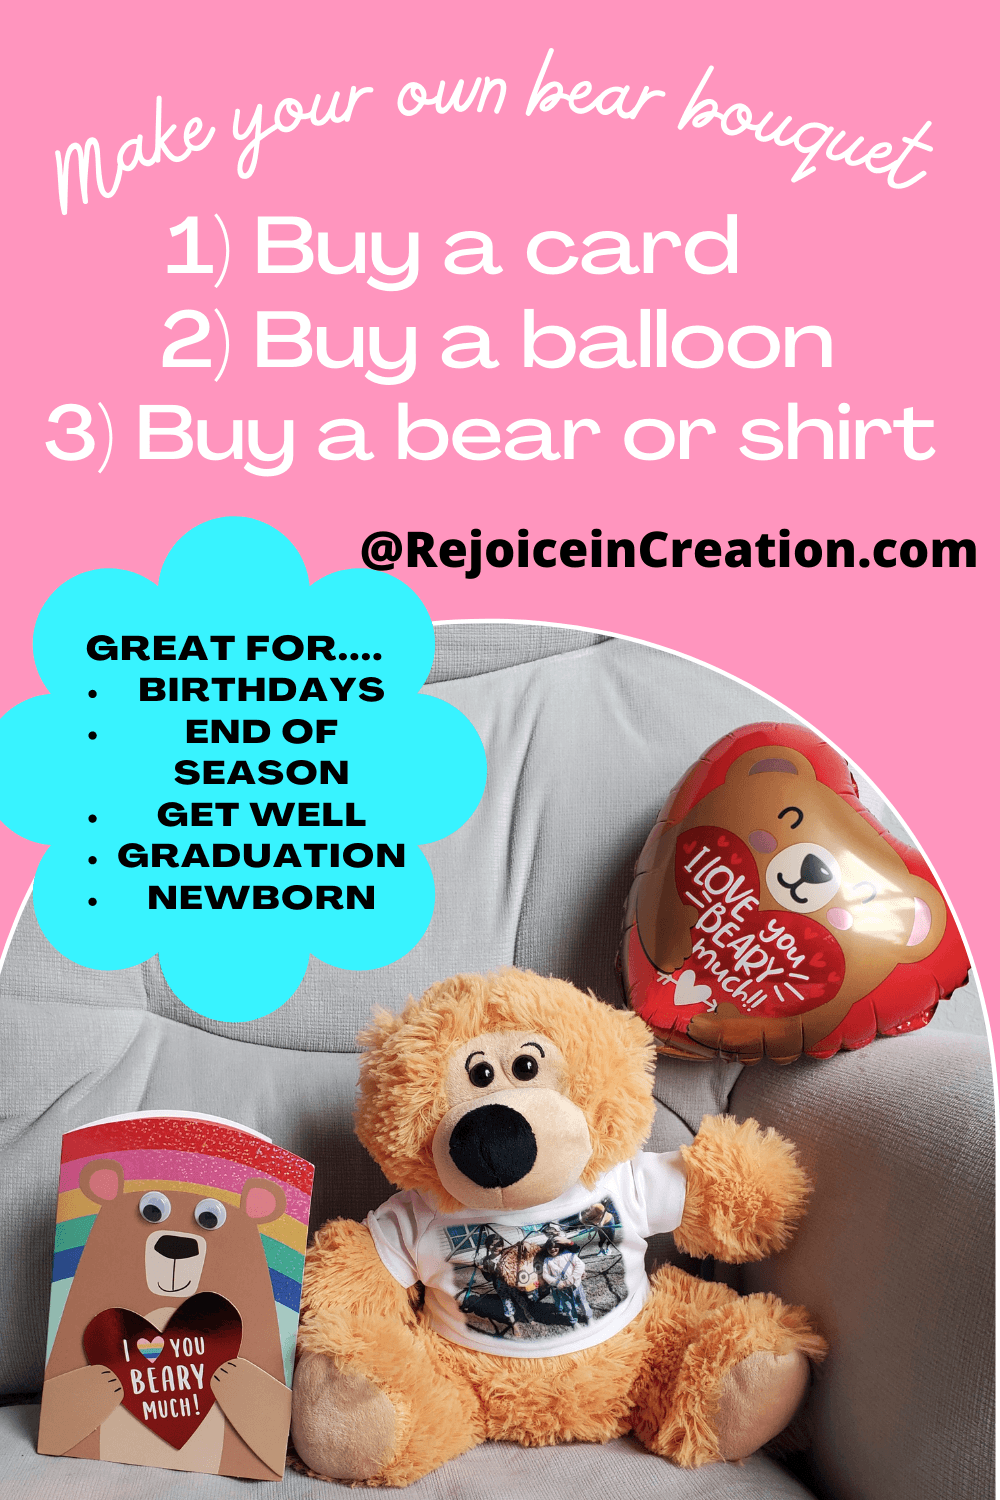 Make Your Own Balloon Bouquet in 1,2,3 Steps - Rejoice In Creation